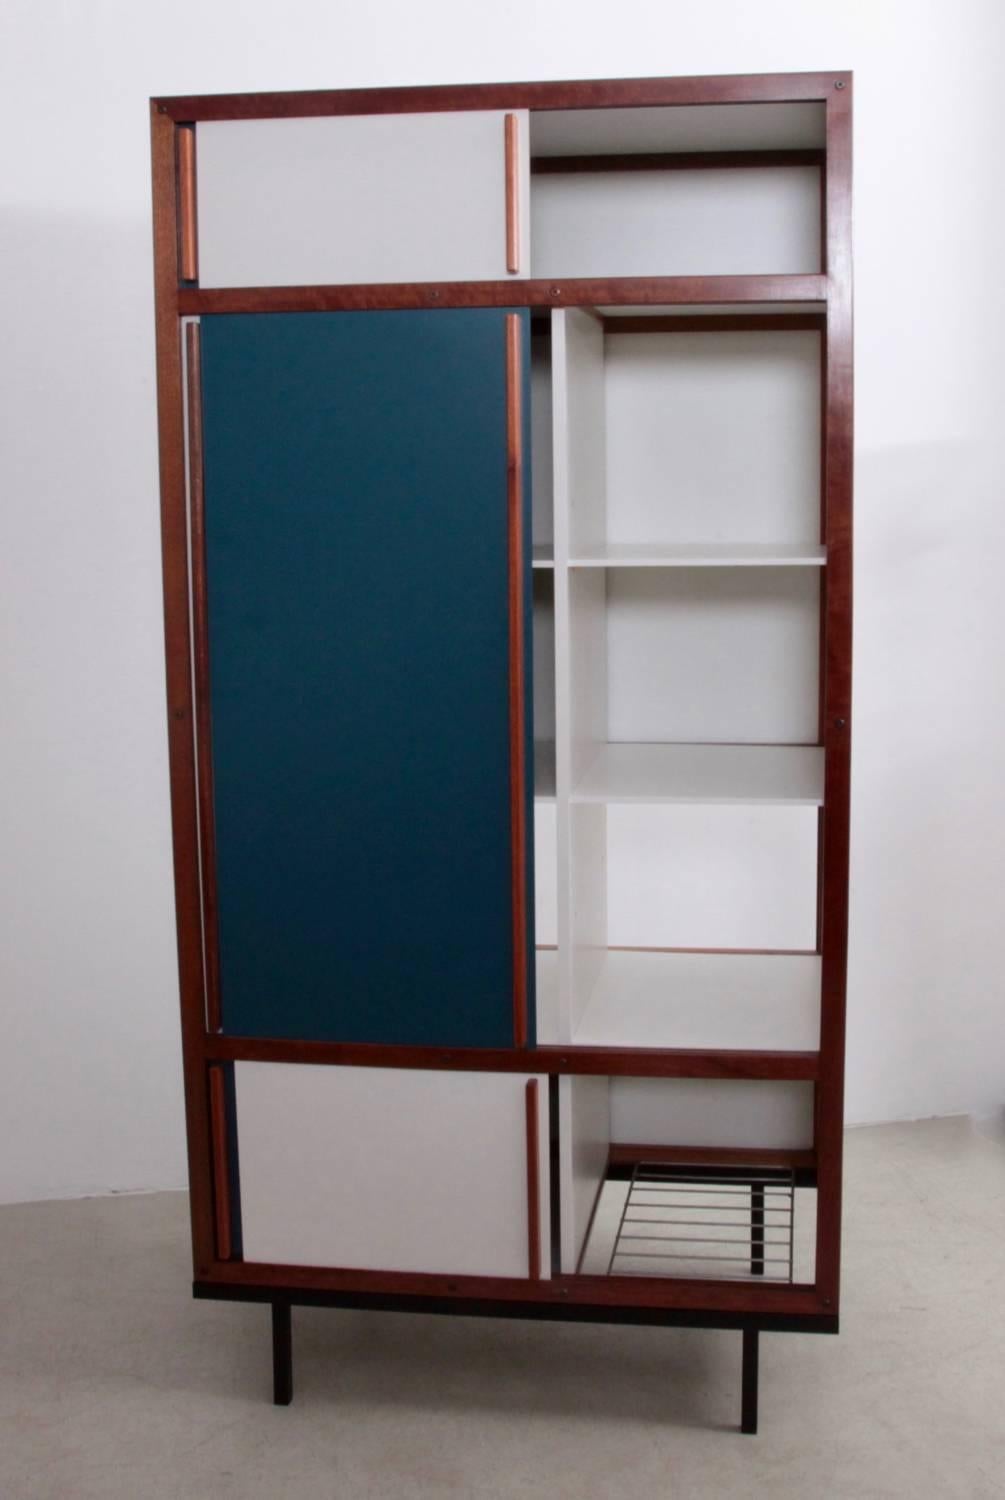 Cabinets, armoires or wardrobe by the most important Lyonaise designer of the 1930s to the 1950s, Andre Sornay. The wood front panels form a dynamic geometric abstraction in white, cream and petrol blue which is framed by the main structure in